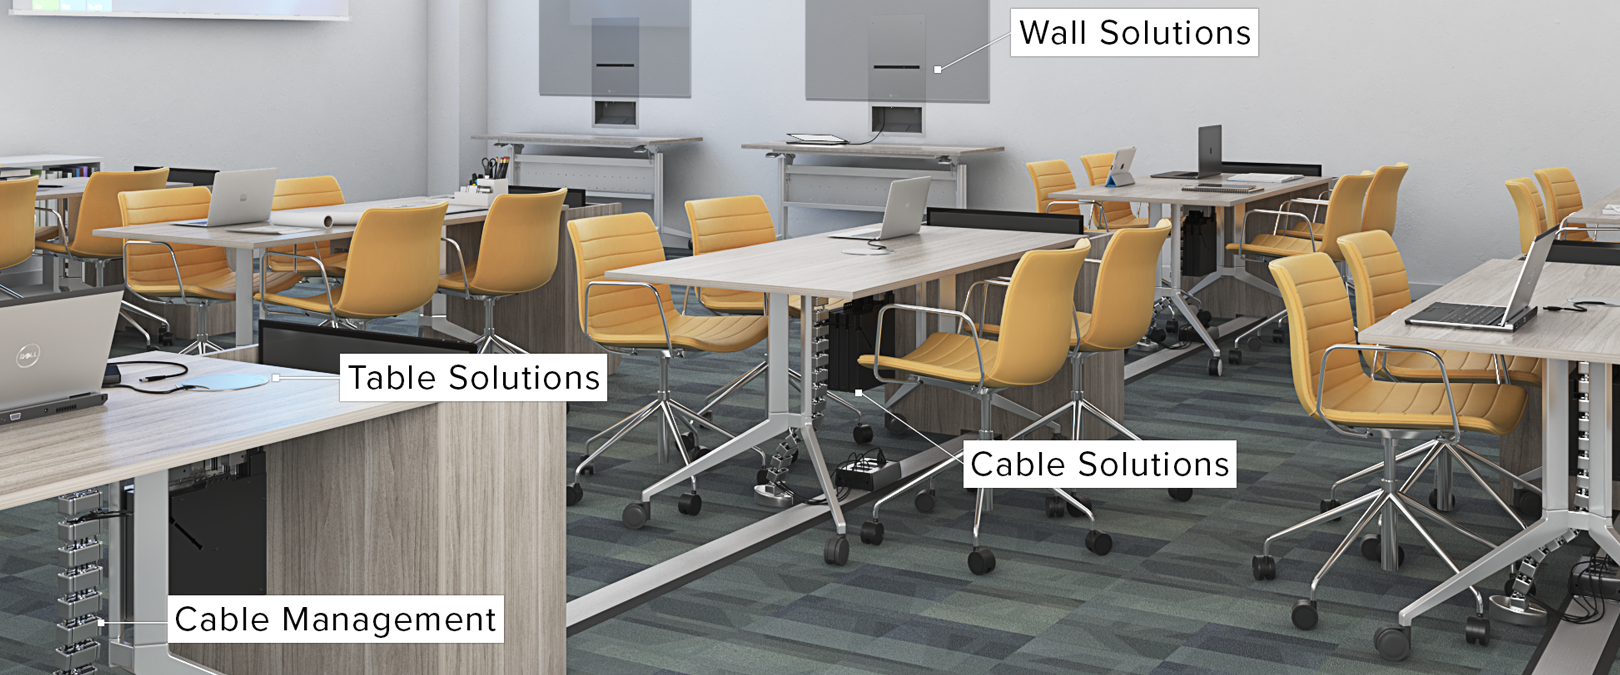 Classroom-Solutions-1620x675 Keeping Active Learning Spaces Active - FSR, Inc. - AV Connectivity Solutions